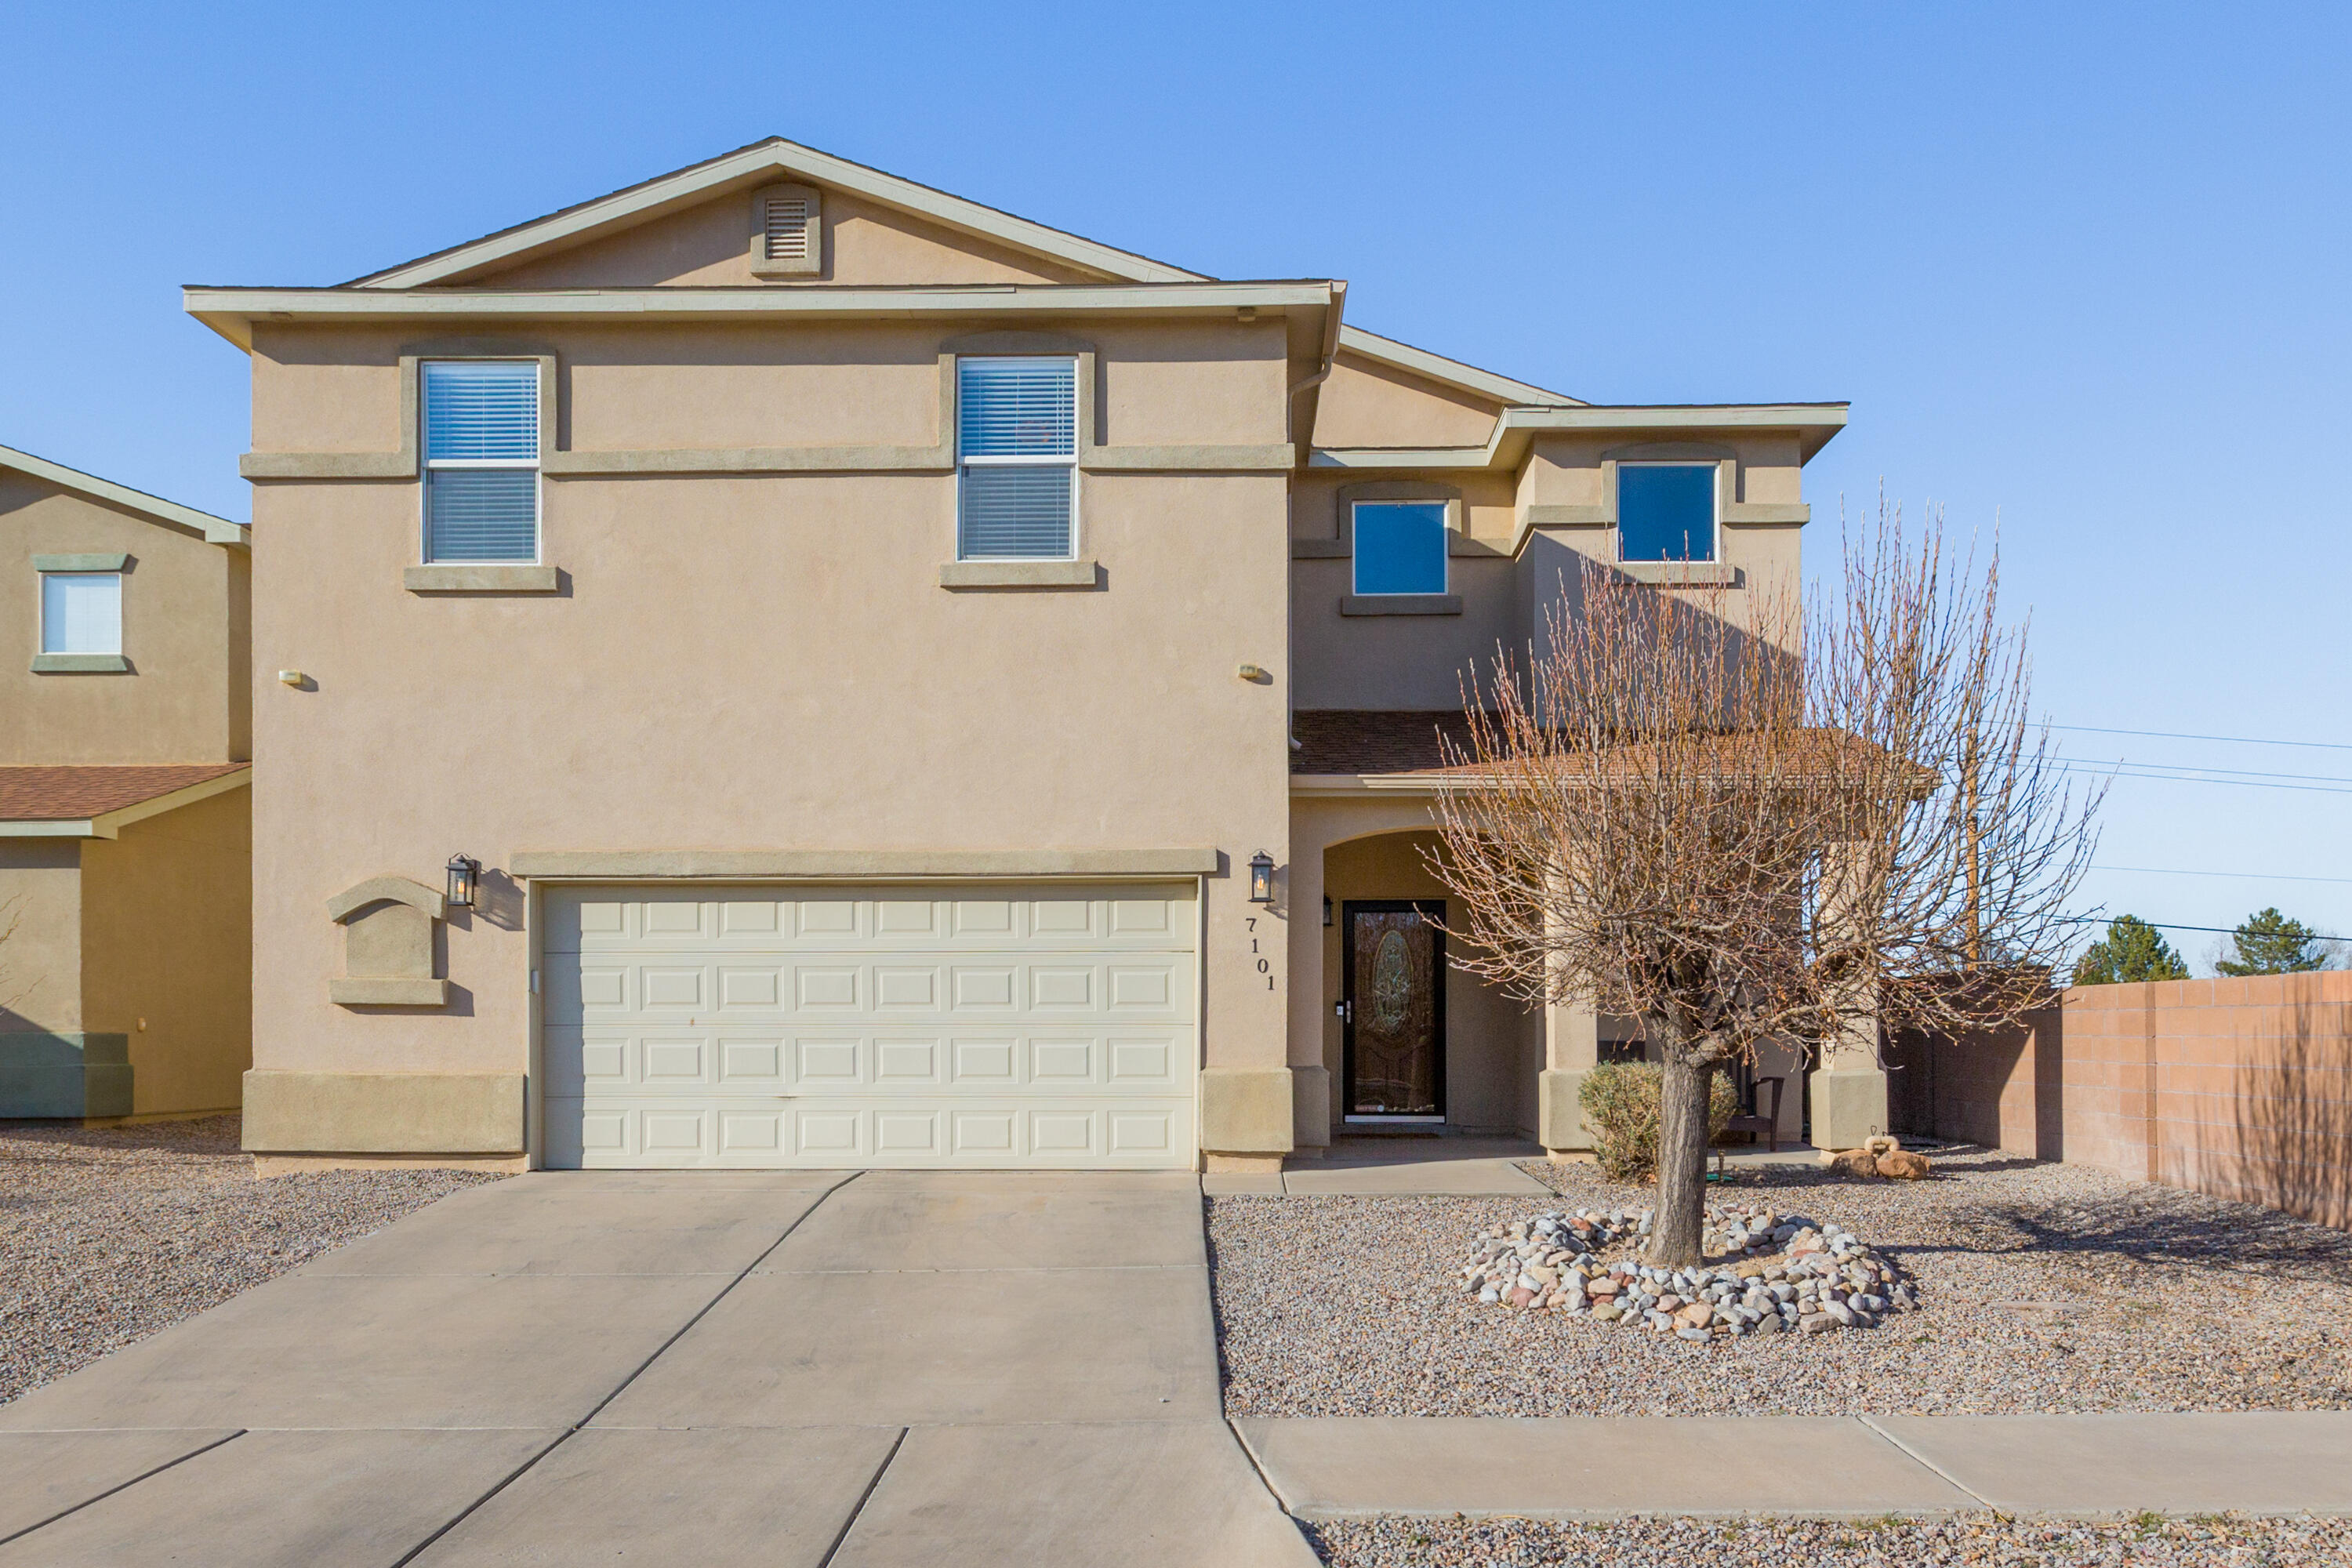 Open Houses: Saturday 4/13/24 (12pm-5pm) and Sunday 4/14/24 (12 pm-5 pm). This lovely 5 Bedroom, 3 bath home with a 2 car garage offers many features and is near an open space area. Recent upgrades within the last 2-3 years include fresh paint, new kitchen appliances, and premium carpet and padding. Other renovations include the downstairs 3/4 bath and upstairs bath, complete with a double vanity, newly tiled shower, and heated jetted tub. Additional improvements include a new garage door opener, updated interior and exterior lighting, and new vinyl flooring on the main level. The cool deck around the inground gunite pool area was recently redone. Leased solar.